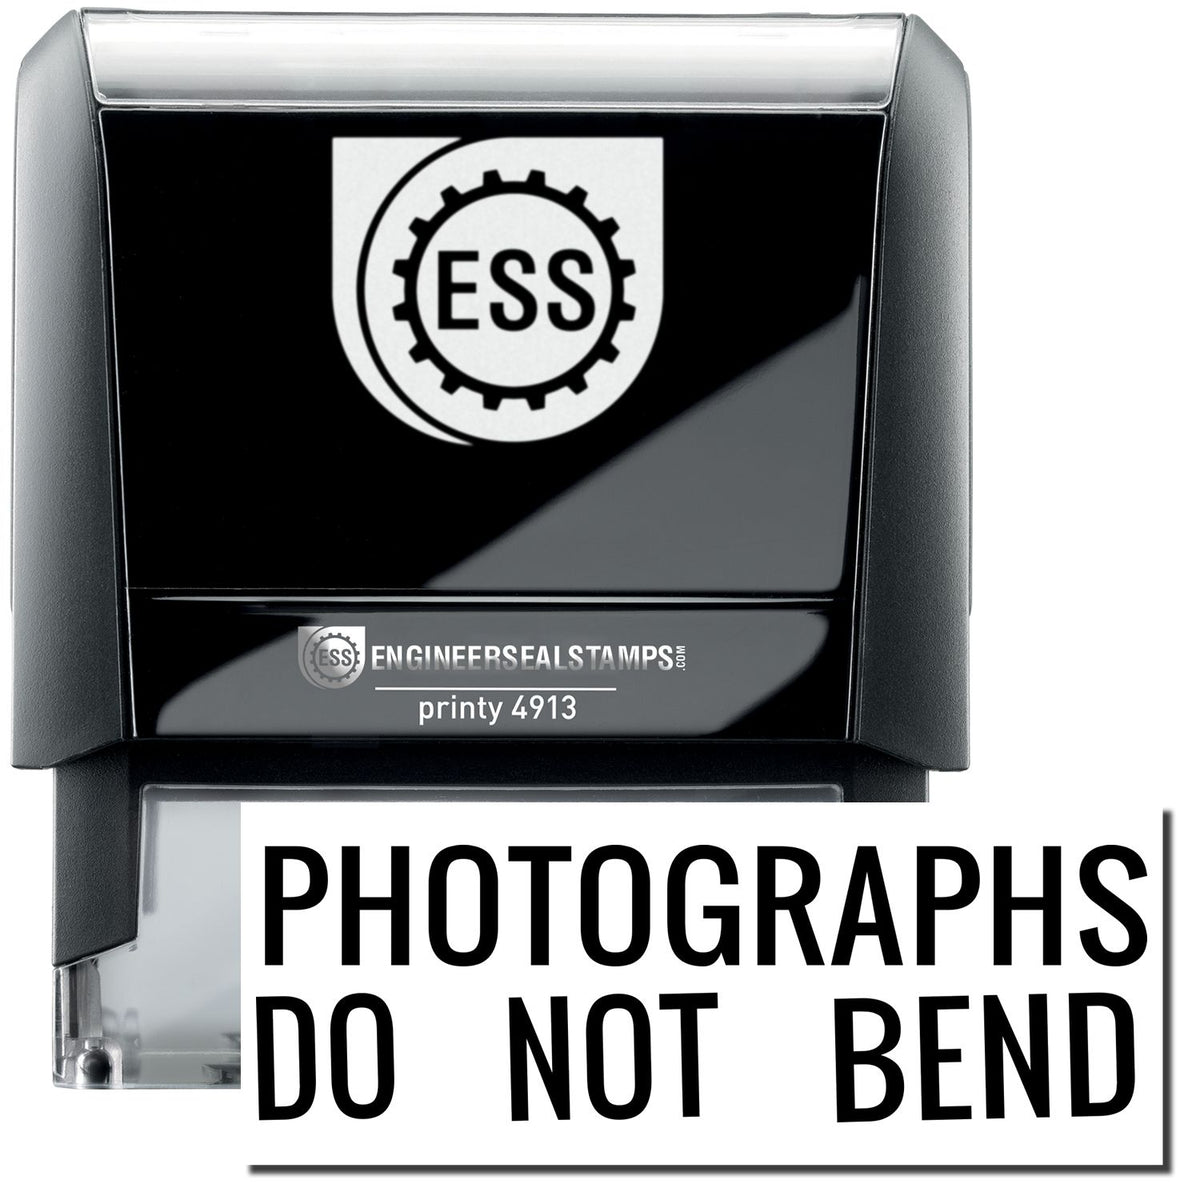 A self-inking stamp with a stamped image showing how the text &quot;PHOTOGRAPHS DO NOT BEND&quot; in a large font is displayed by it after stamping.